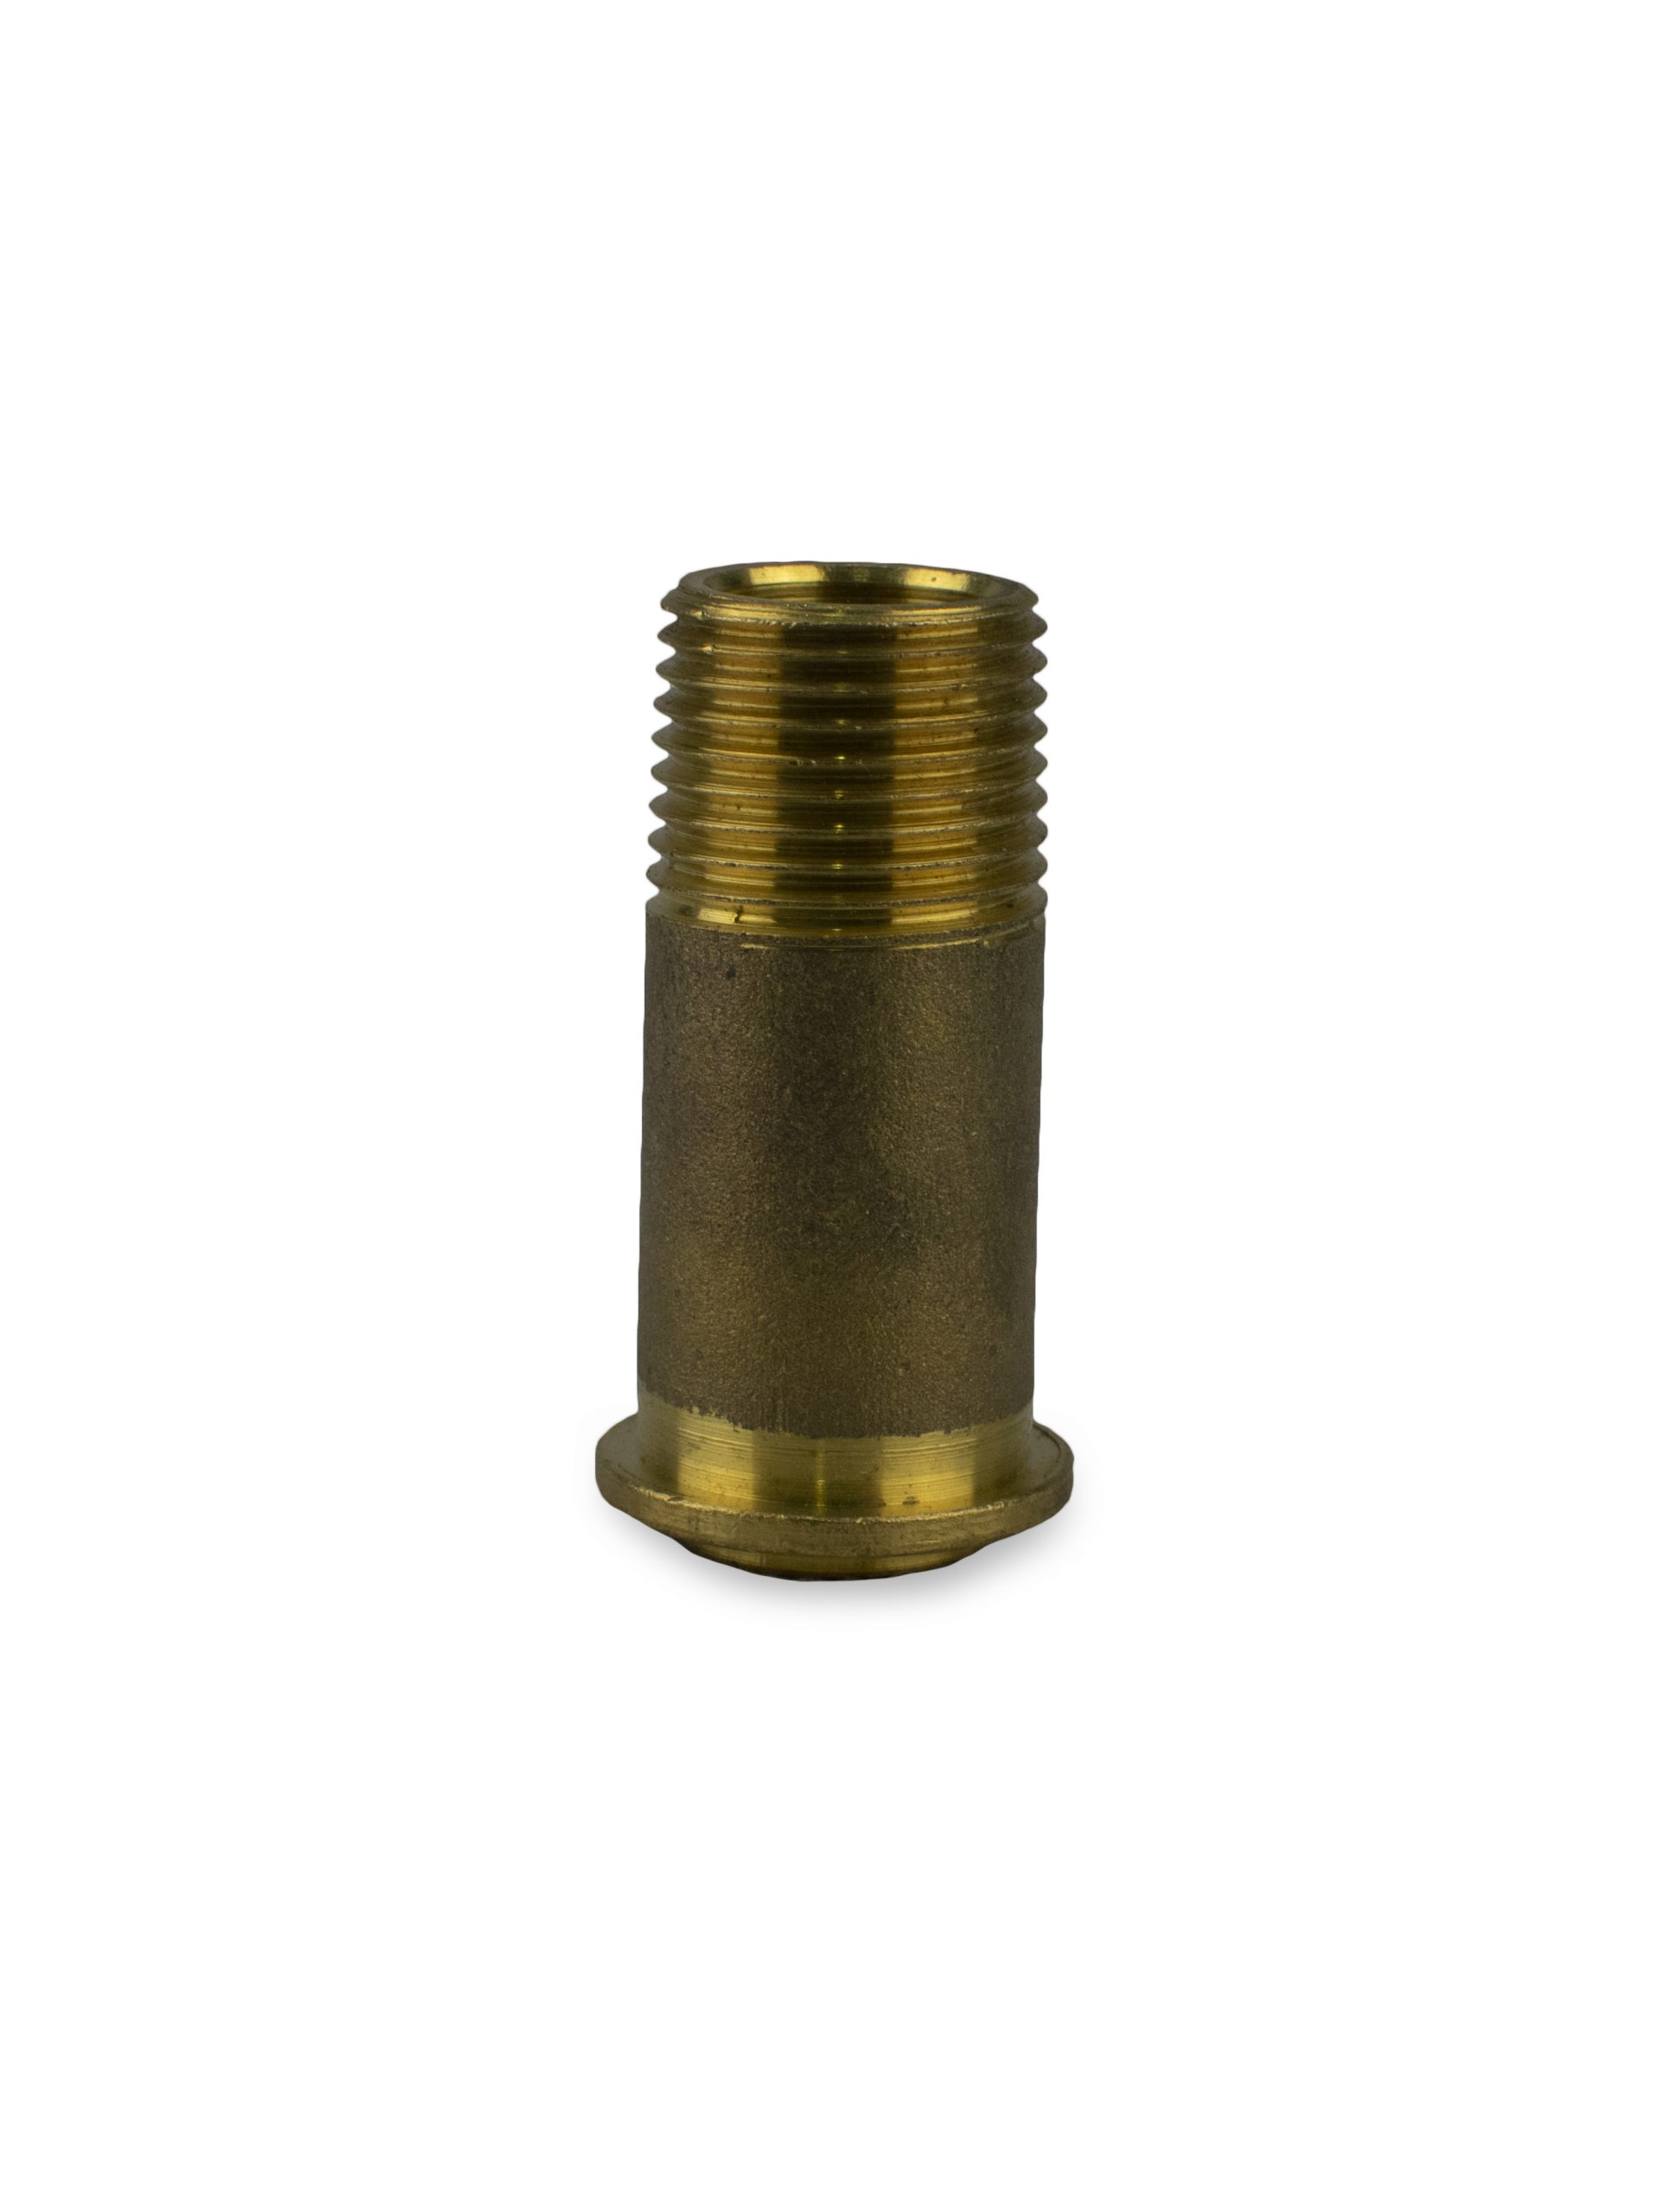 FLANGED CONNECTOR 1/2 Inches BRASS , ALLPEX from Gas Equipment Company Llc Abu Dhabi, UNITED ARAB EMIRATES